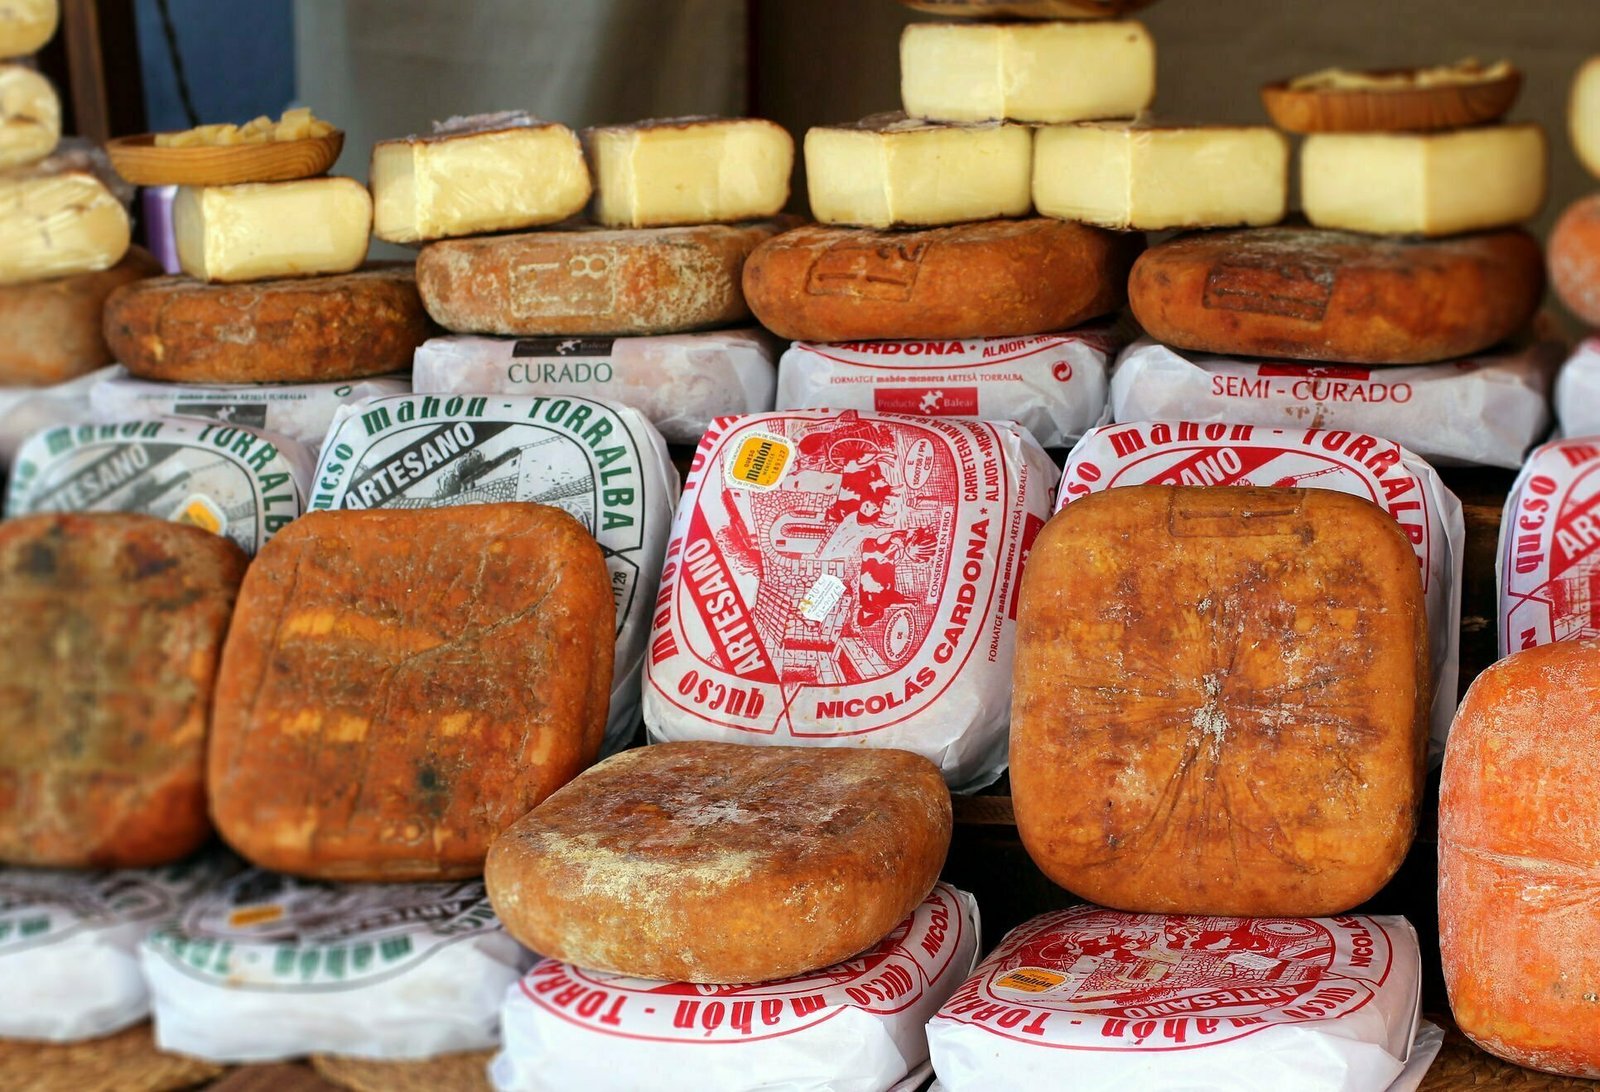 A market stall scene displaying wheels of queso de maron, a popular cheese from the Balearic Island of Menorca